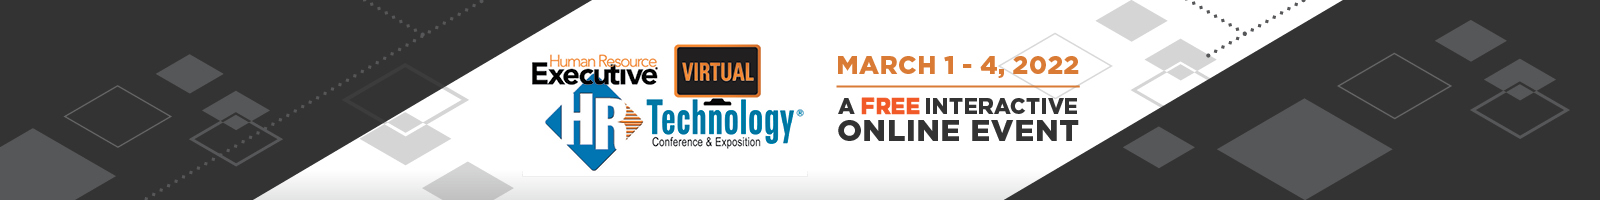 HR Tech Virtual March 1 - 4, 2022 | A FREE Interactive Online Event